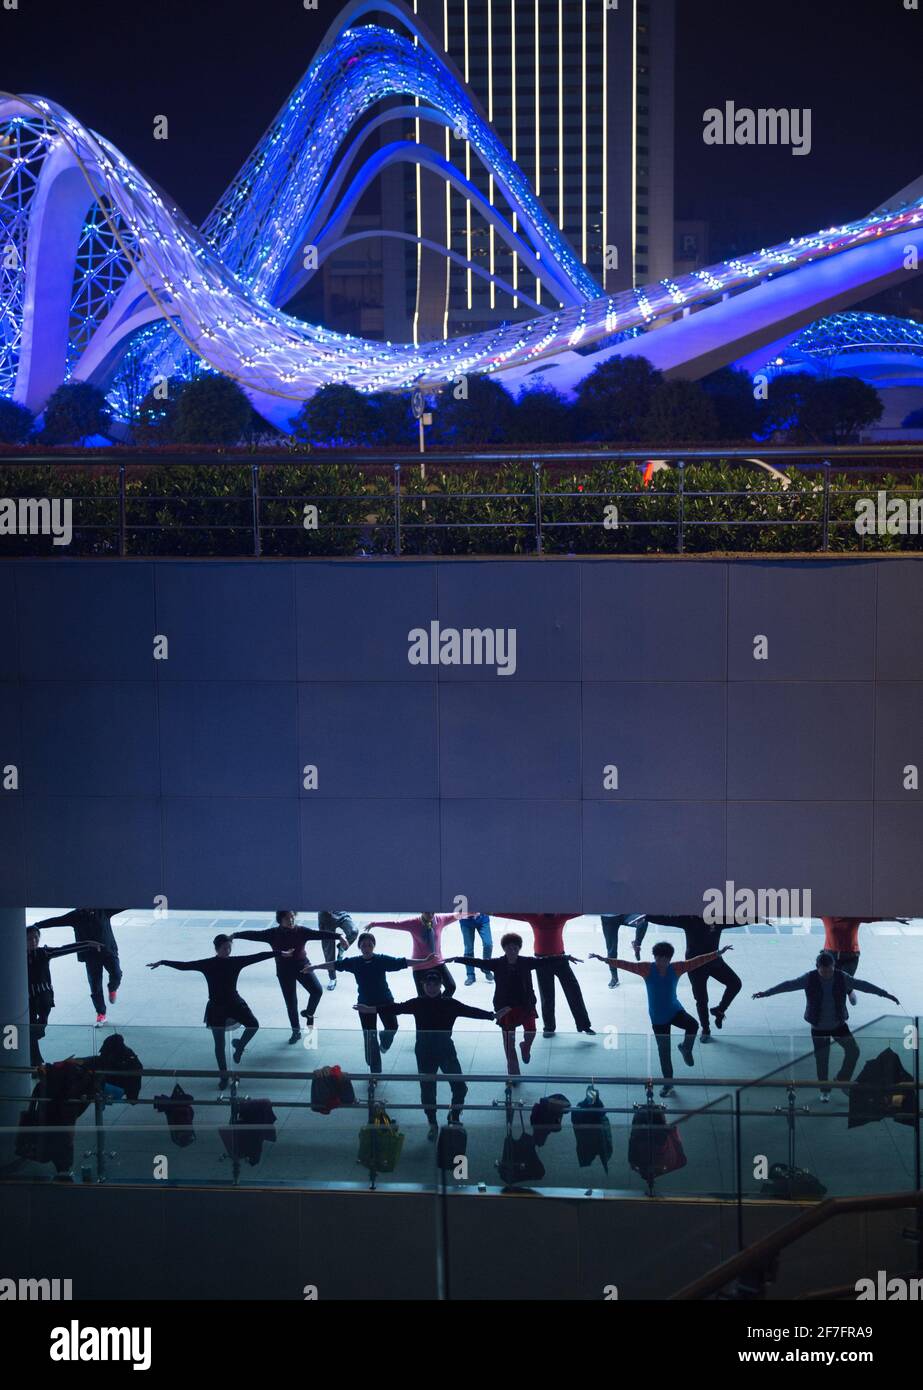 Wuhan, COVID-19. 8th Apr, 2020. People exercise at a plaza in Wuhan, central China's Hubei Province, April 2, 2021. Wuhan, once hit hard by COVID-19, has seen its urban life at night return to normal since its lockdown was lifted on April 8, 2020. Credit: Wu Zhizun/Xinhua/Alamy Live News Stock Photo